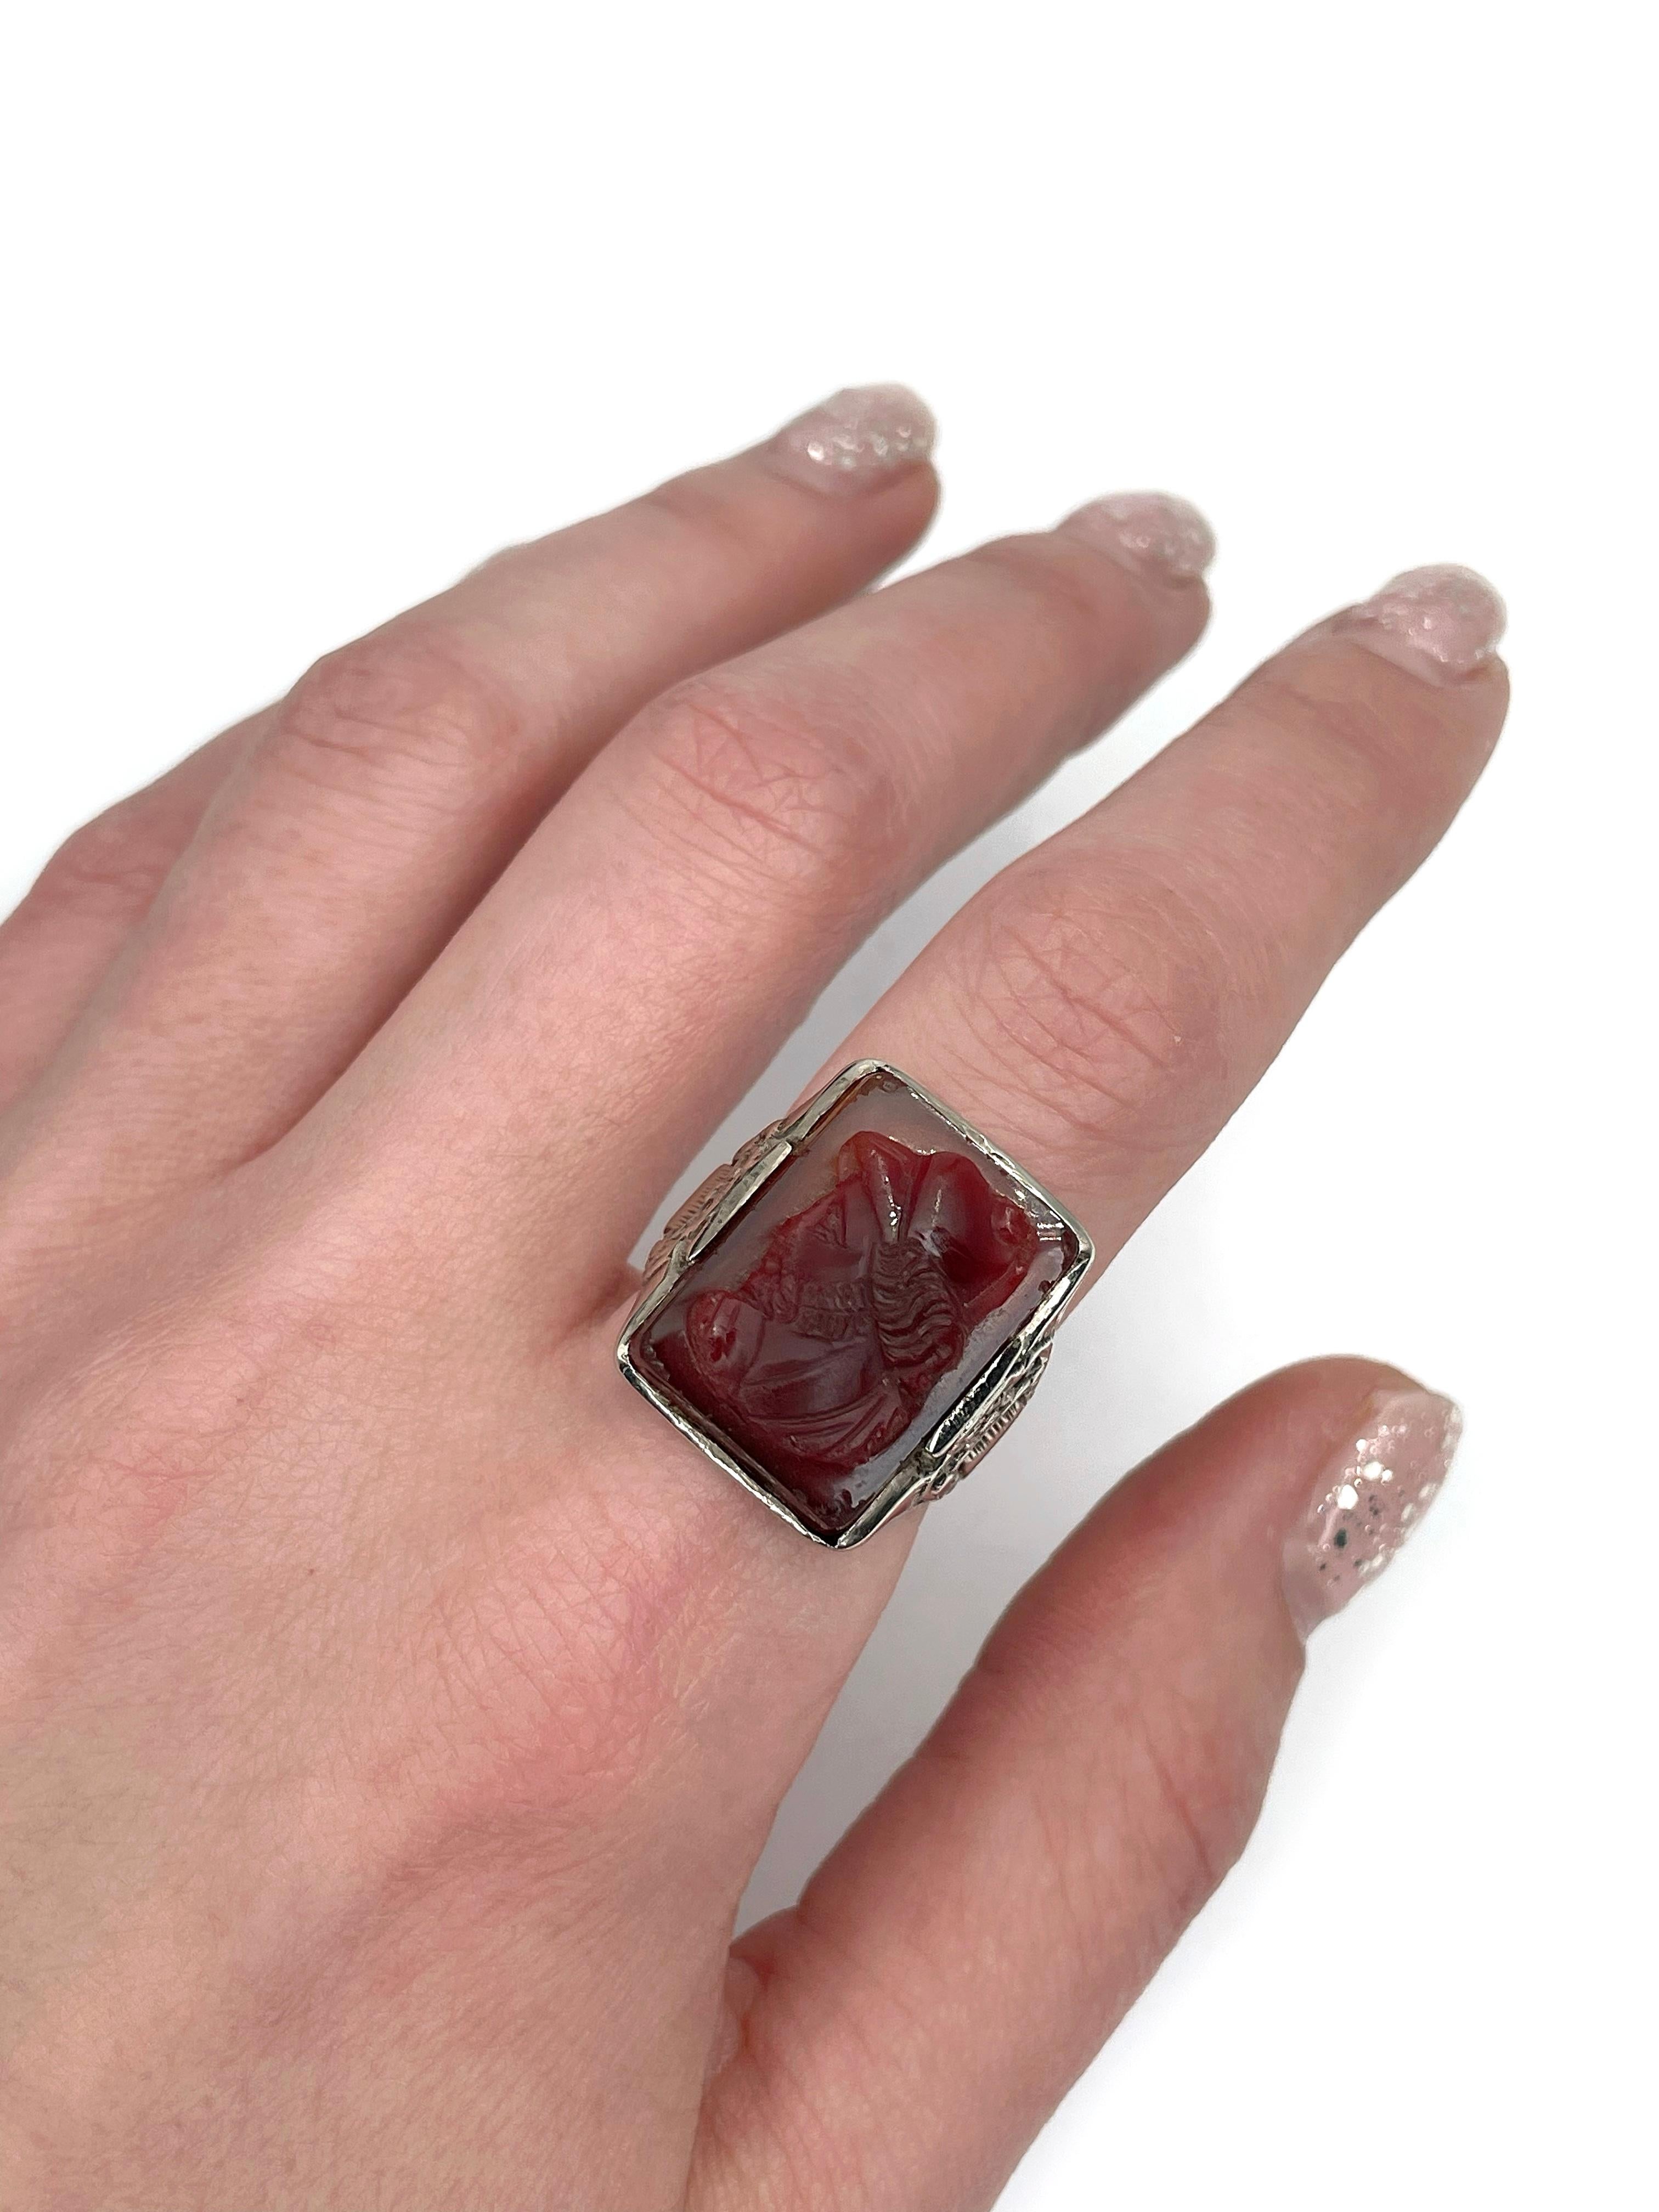 This is a massive rectangle signet ring crafted in 14K white gold. The piece features carved carnelian depicting a man with a beard.

Weight: 12.36g
Size: 18 (US 8)

IMPORTANT: please ask about the possibility to resize before purchase. This process